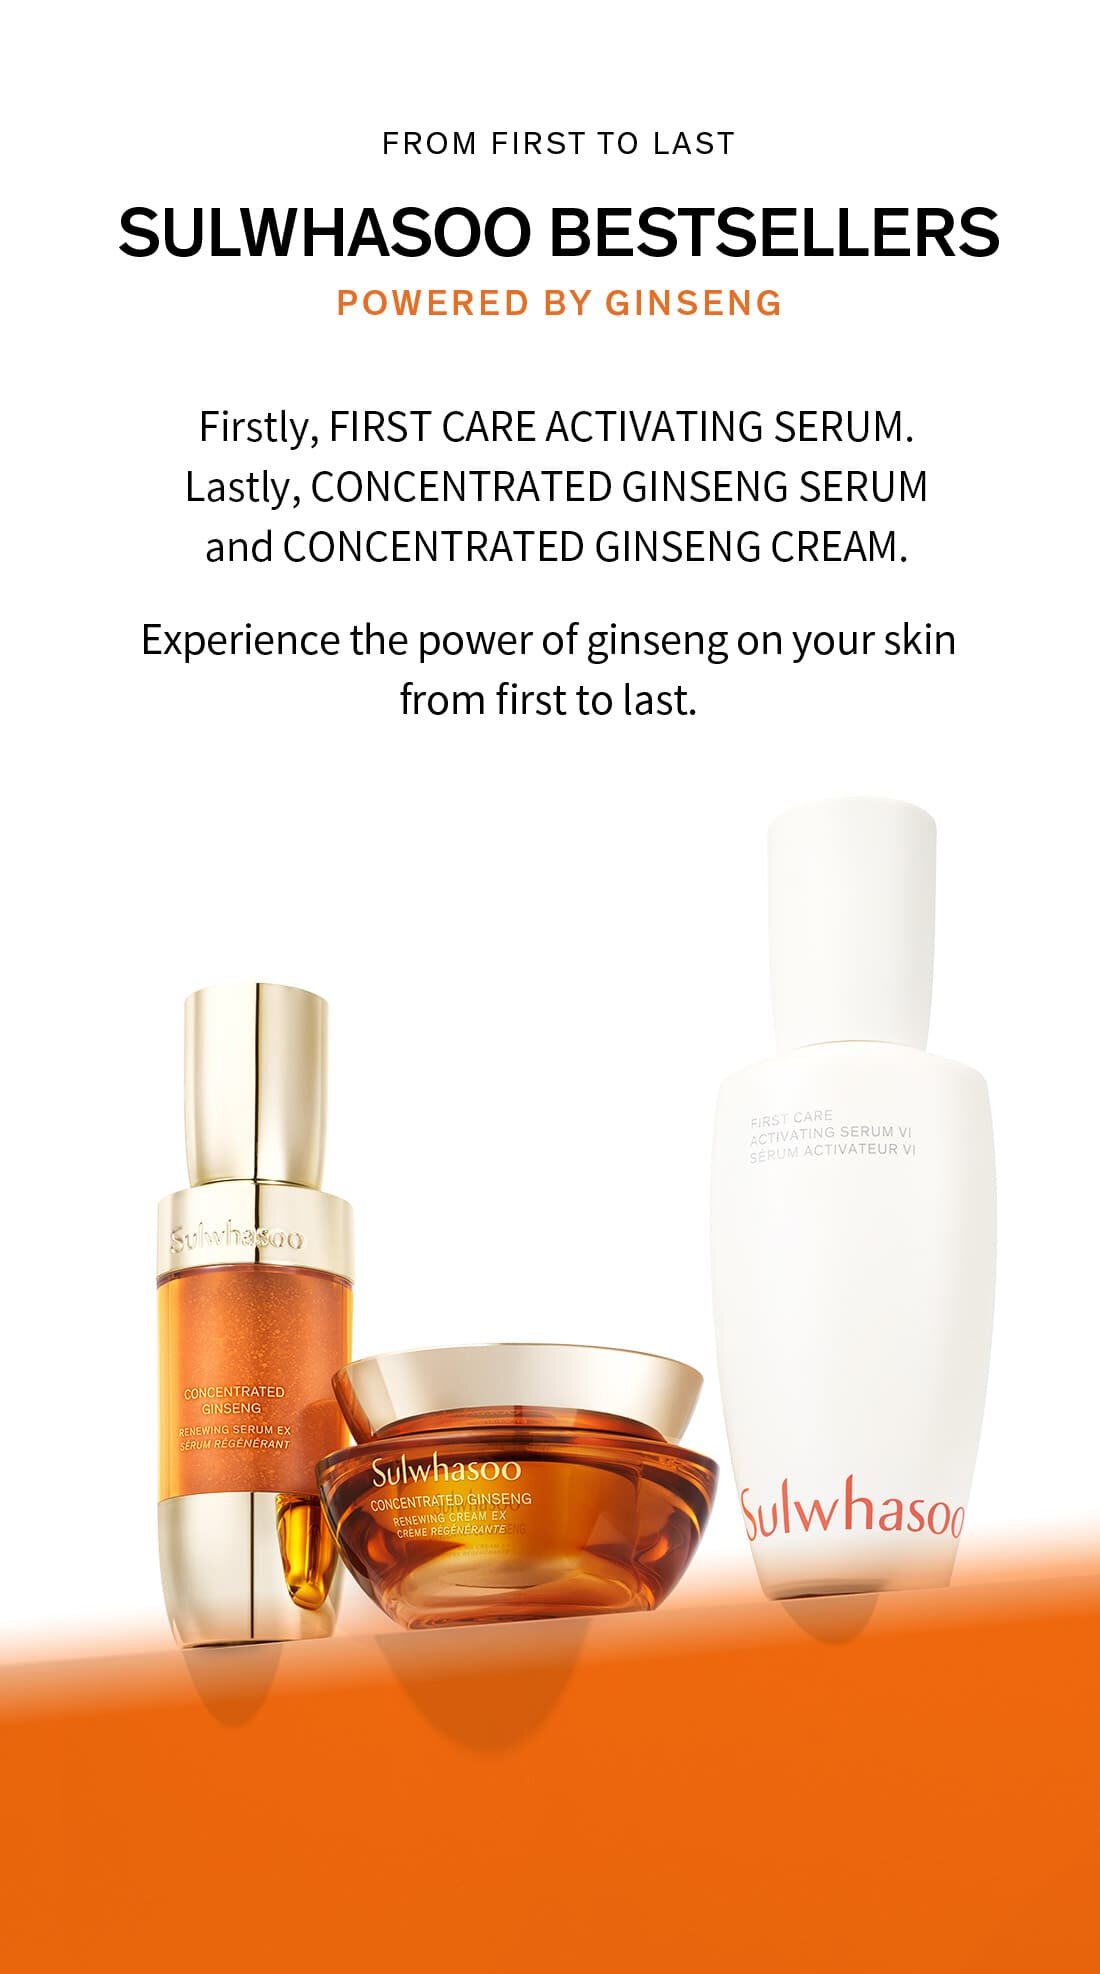 FROM FIRST TO LAST sulwhasoo bestsellers powered by ginseng Firstly, FIRST CARE ACTIVATING SERUM. Lastly, CONCENTRATED GINSENG SERUM and CONCENTRATED GINSENG CREAM. Experience the power of ginseng on your skin from first to last. 